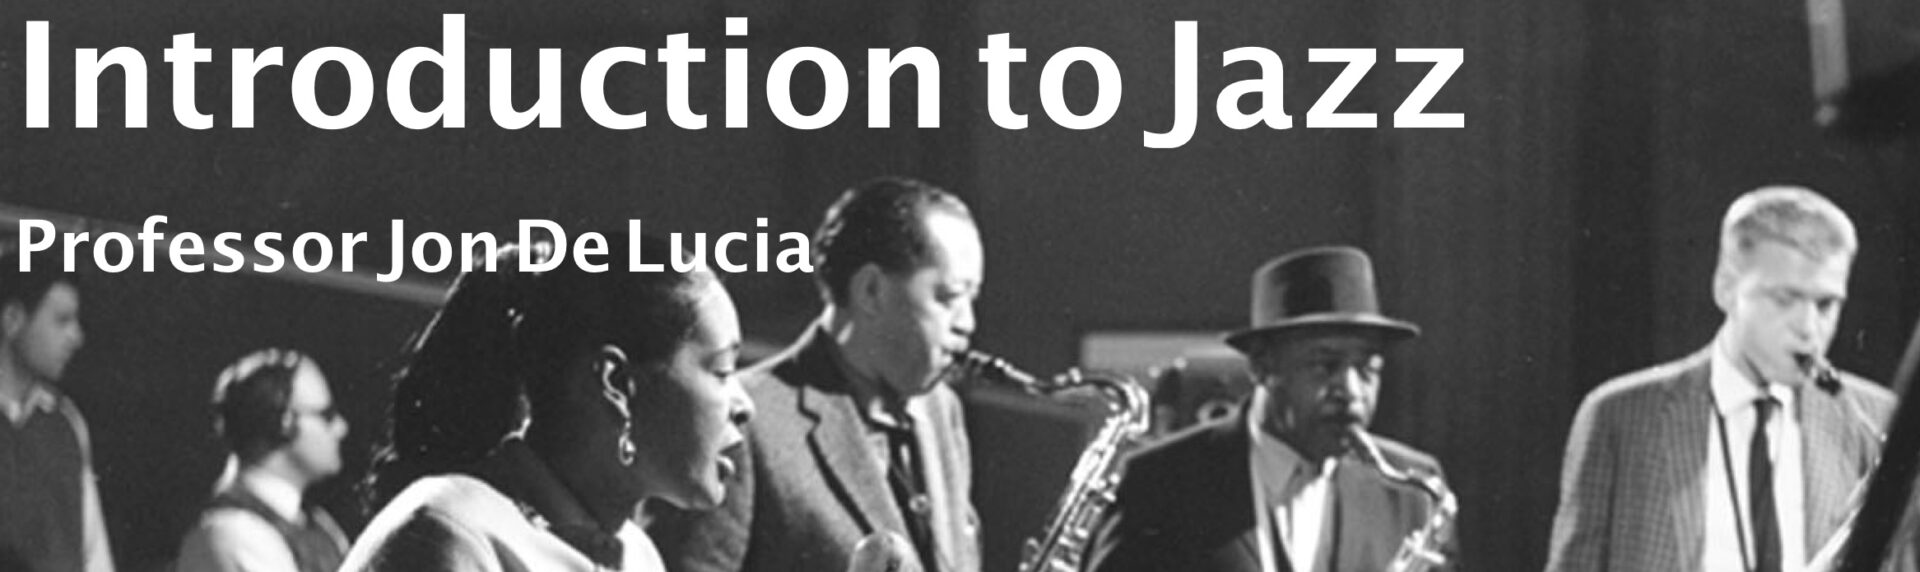 Introduction to Jazz